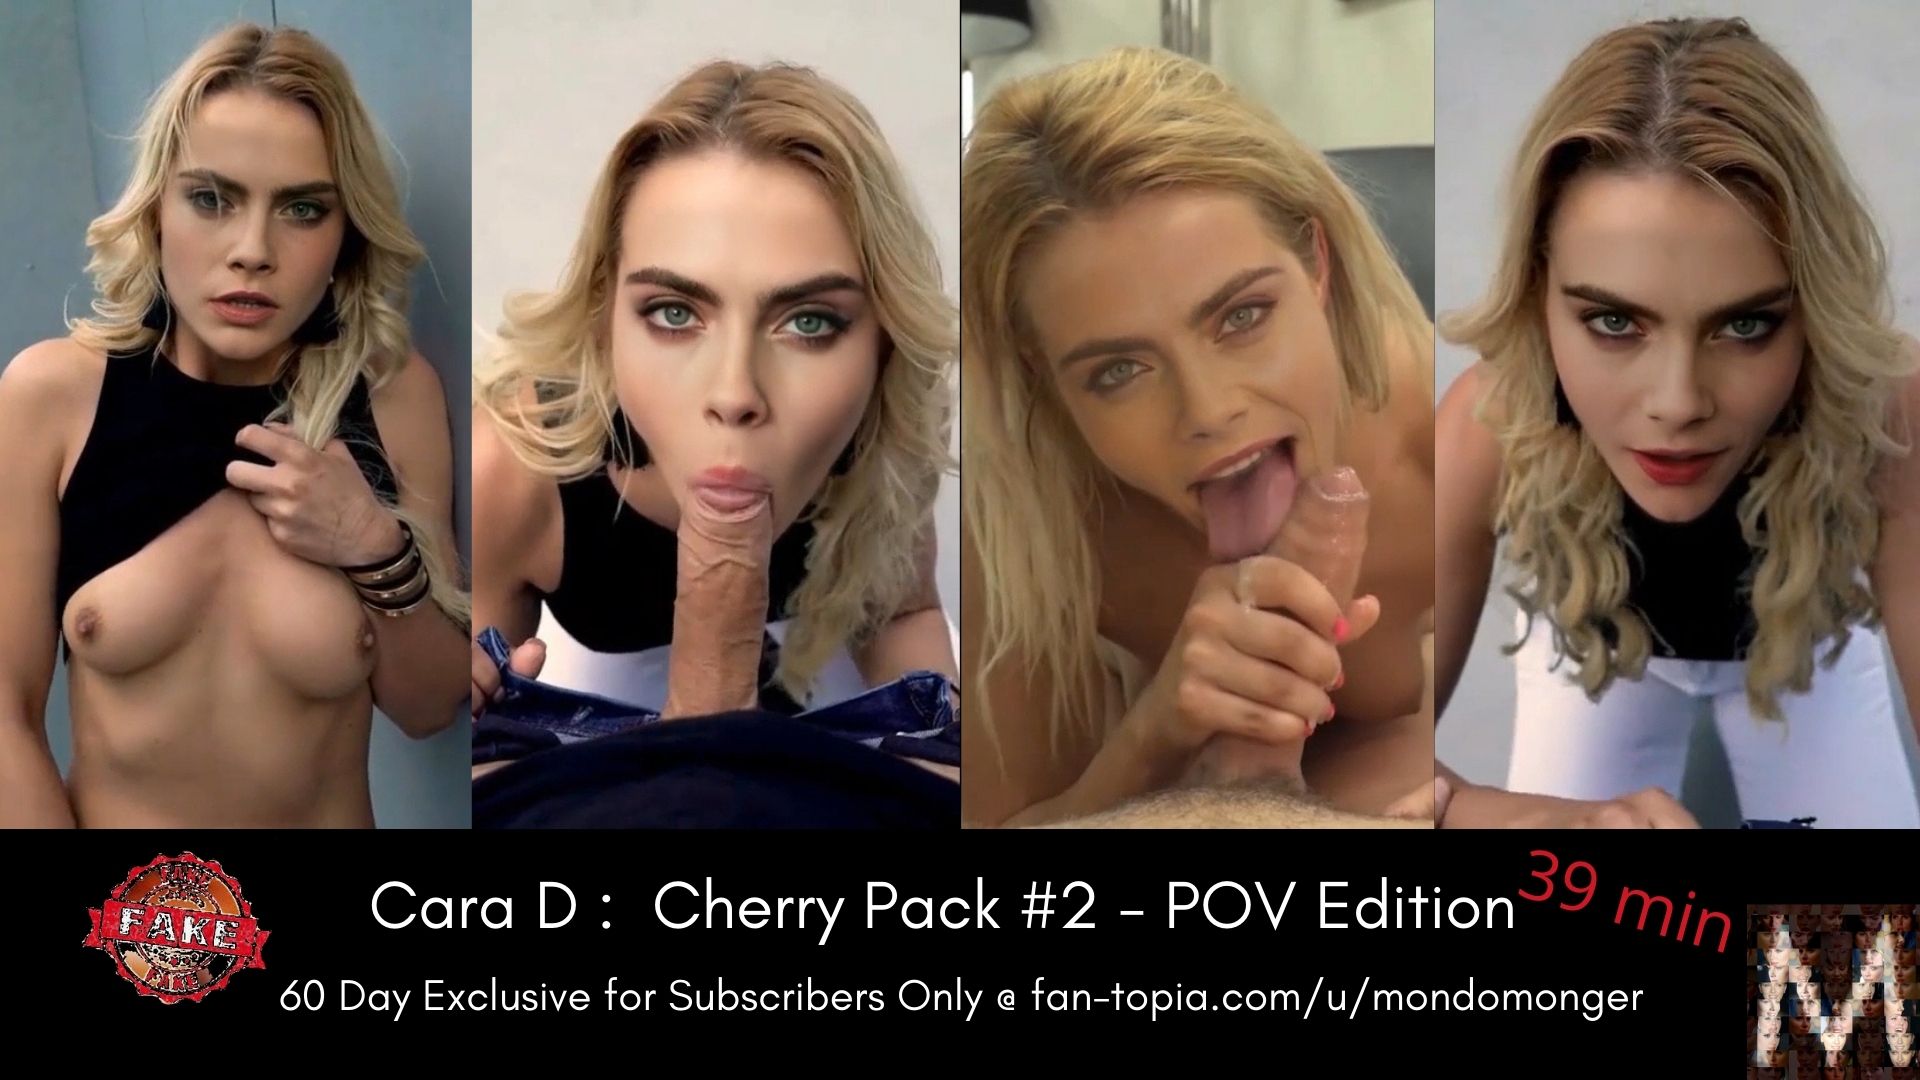 Not Cara Delevingne:  39min Cherry Kiss Pack #2 - POV Lifeselector Edition (Preview)